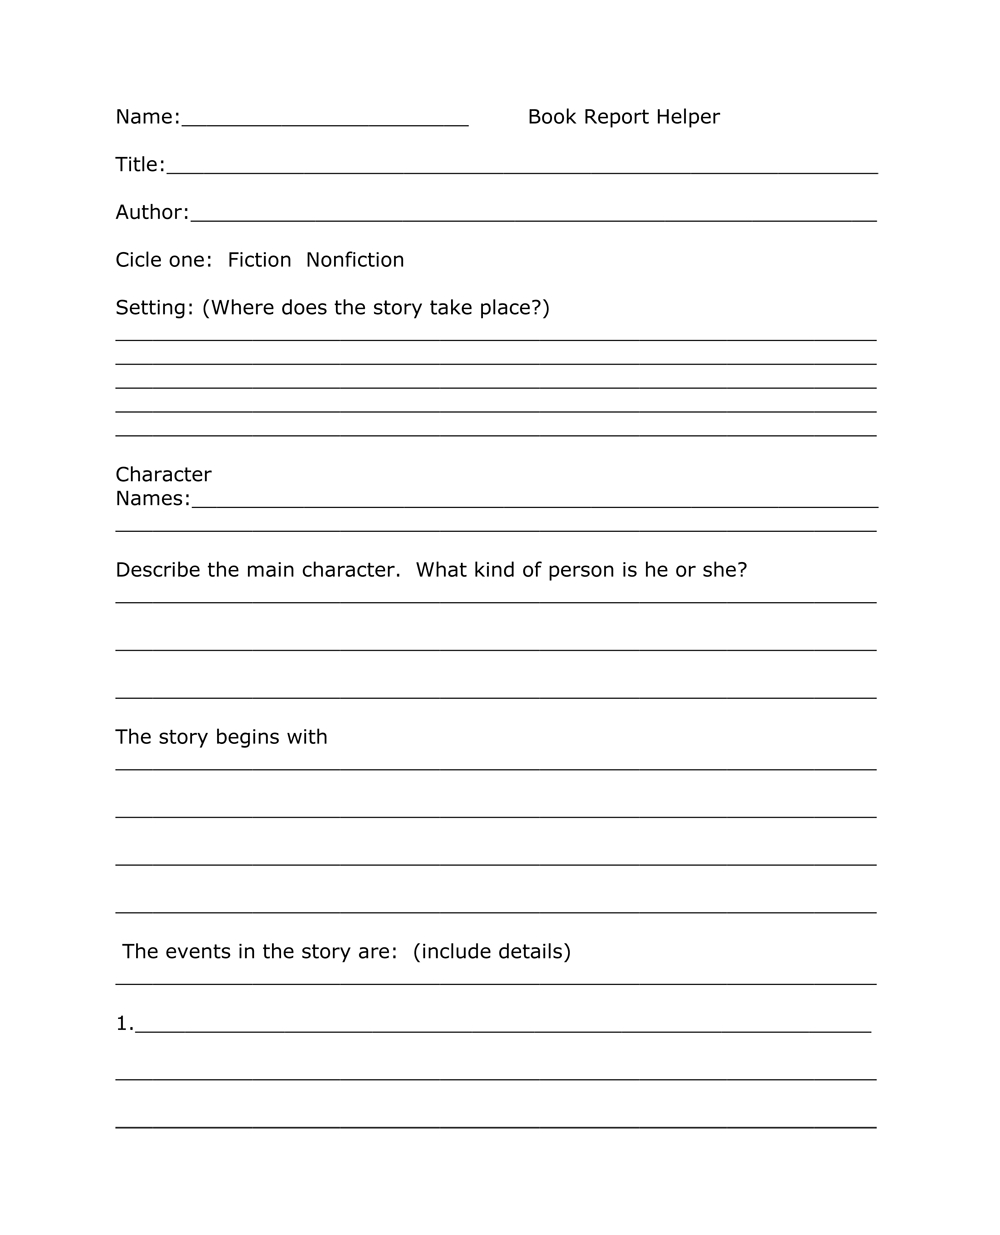 Book Report Templates From Custom Writing Service Intended For Story Report Template